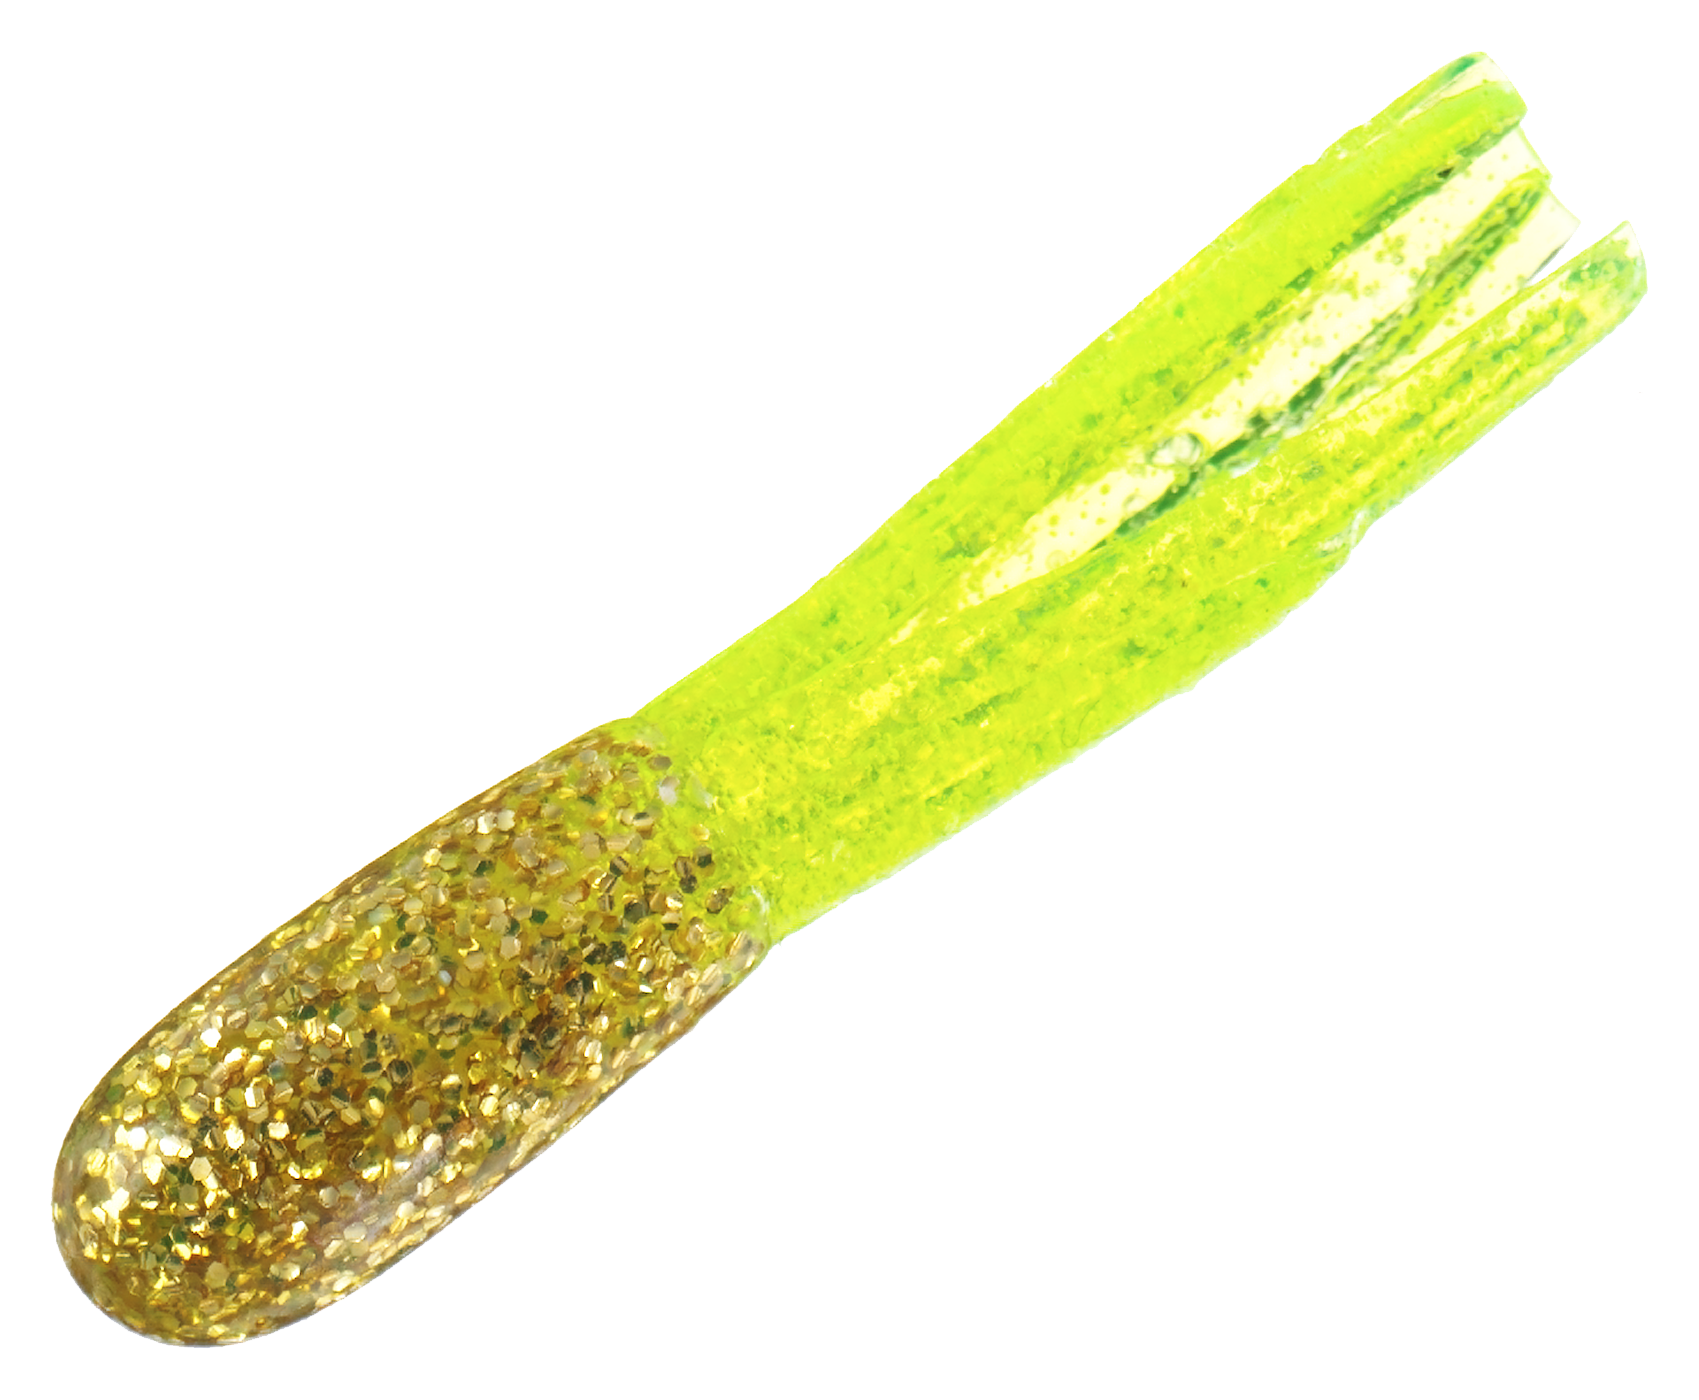 Bass Pro Shops Sparkle Squirts - 1-1/2"" - 15 pack - Electric Gold/Chartreuse